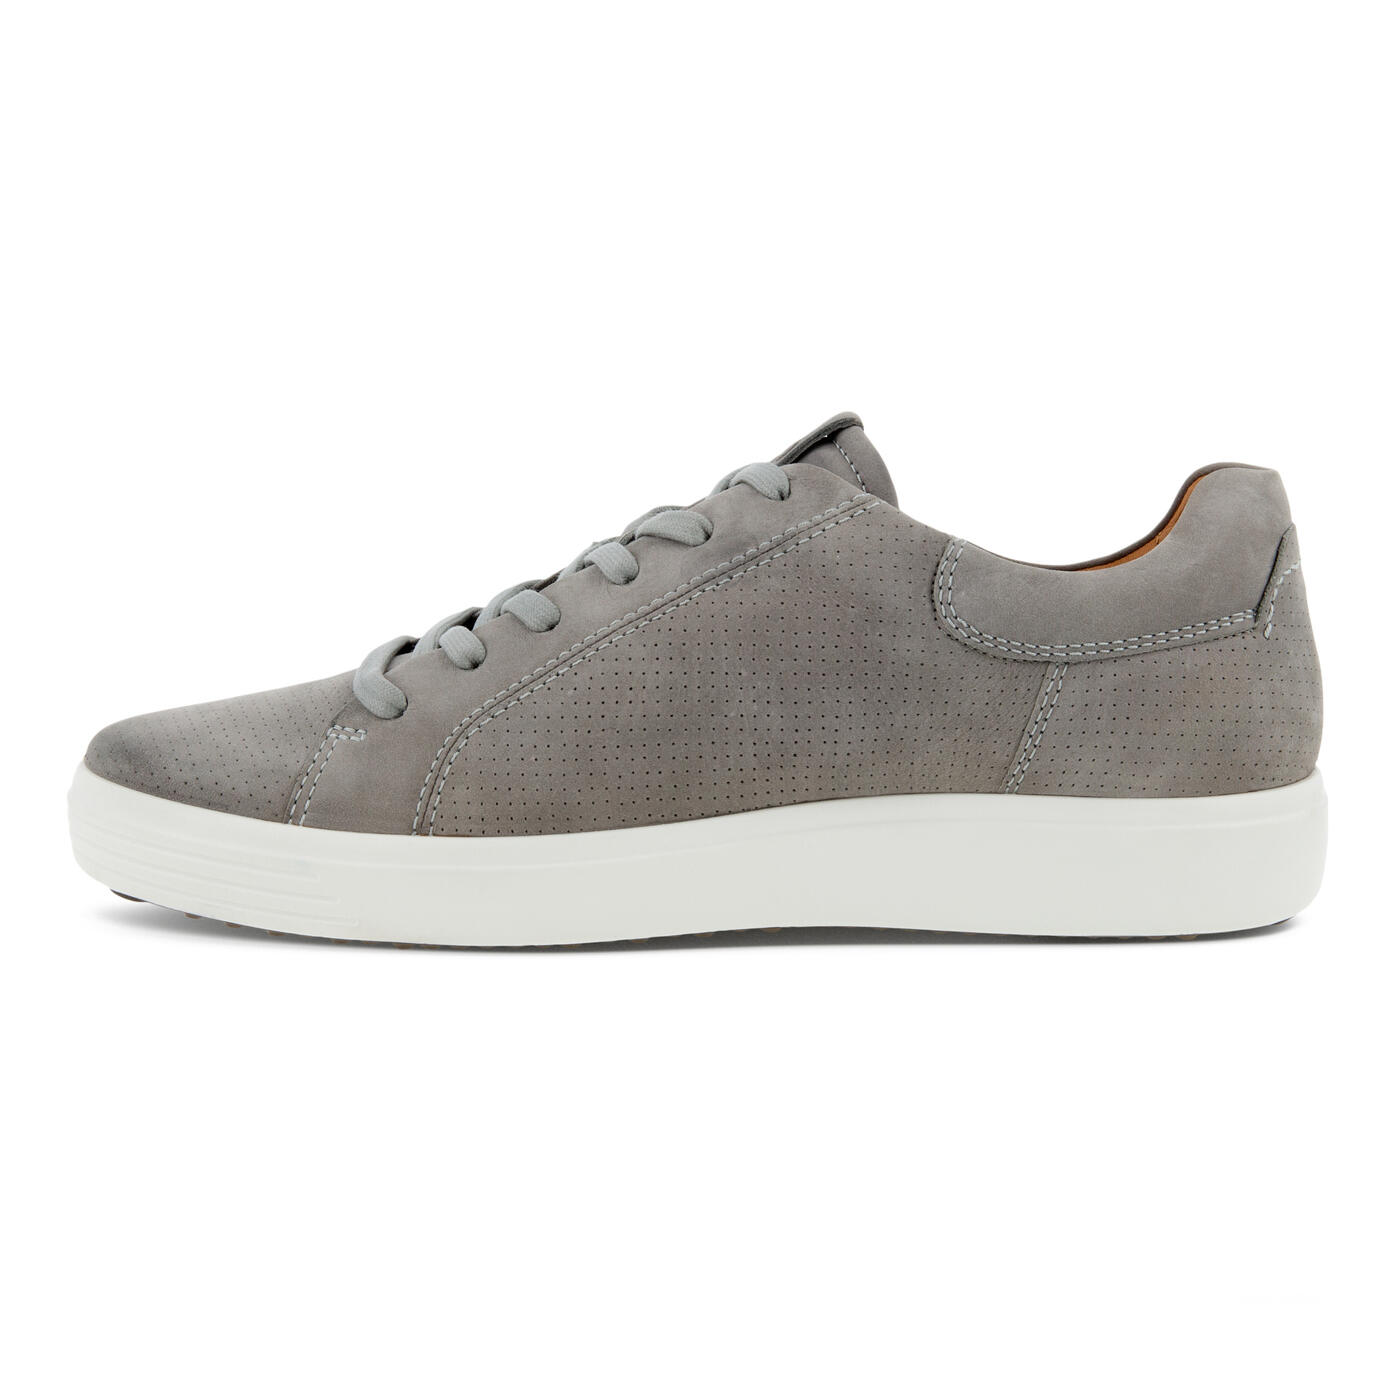 Men's Soft 7 Laced Sneakers | Official Store | ECCO® Shoes